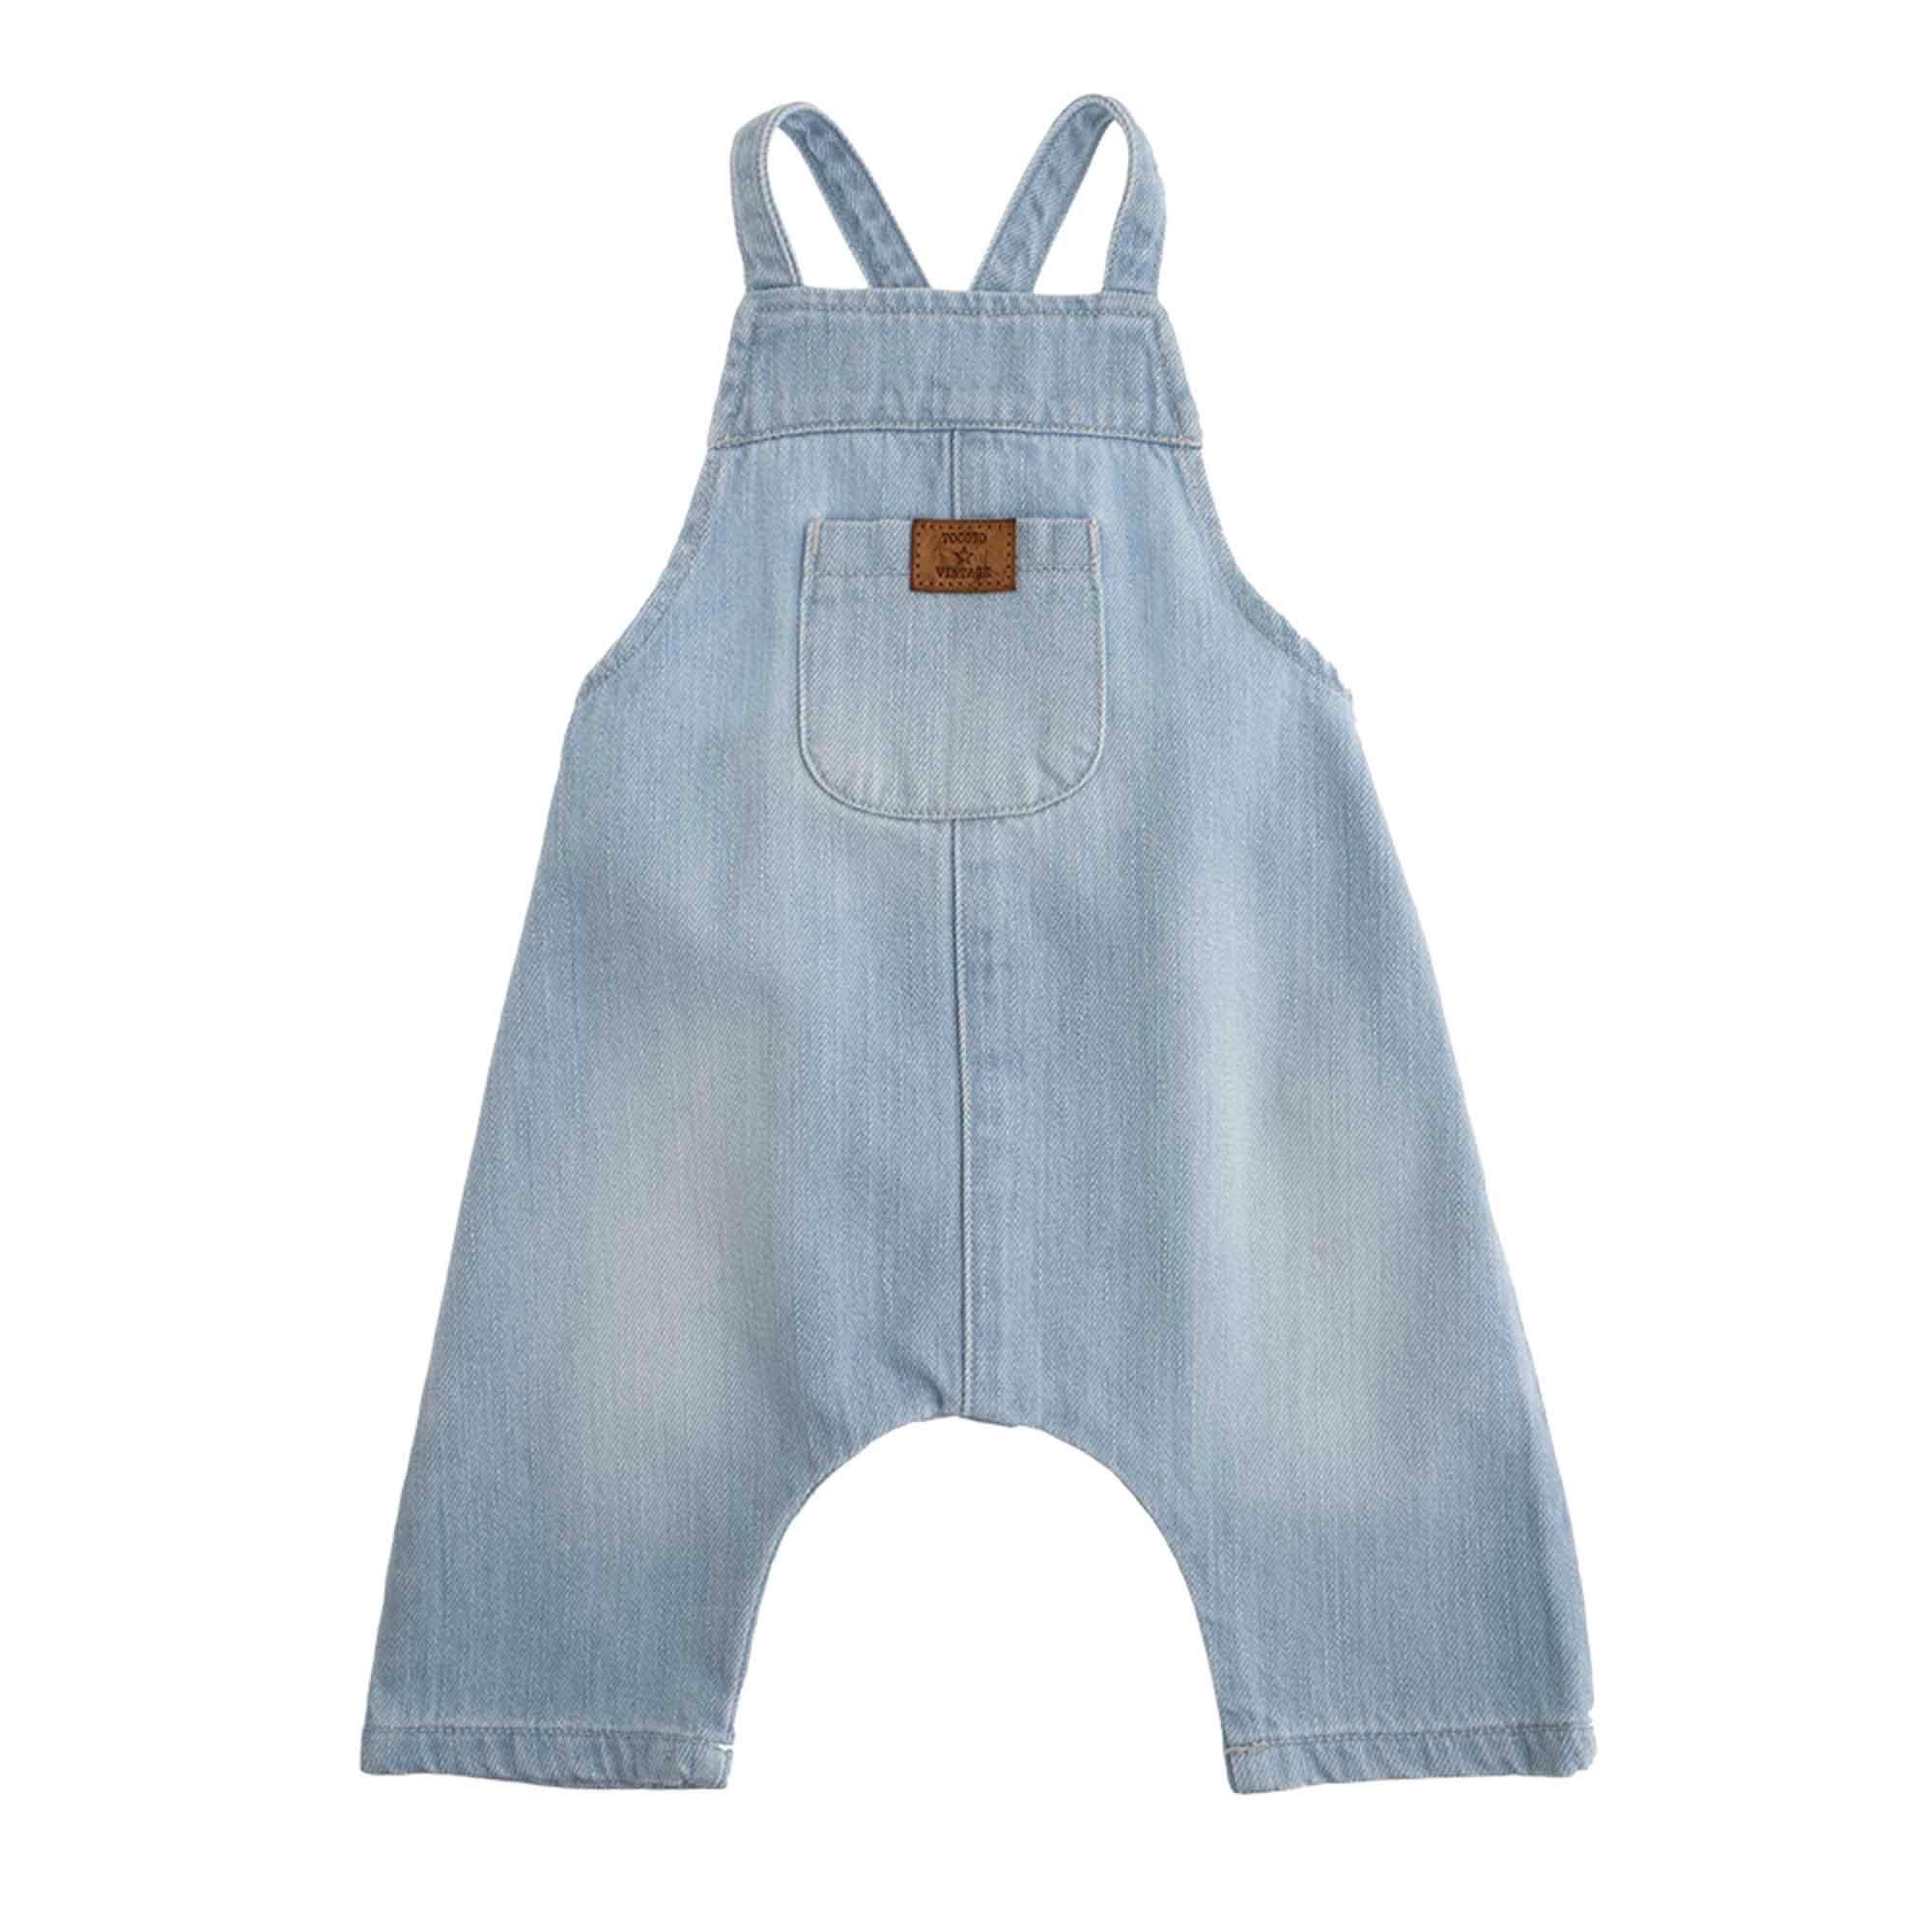 discount 71% KIDS FASHION Baby Jumpsuits & Dungarees Casual White 18-24M Zara dungaree 